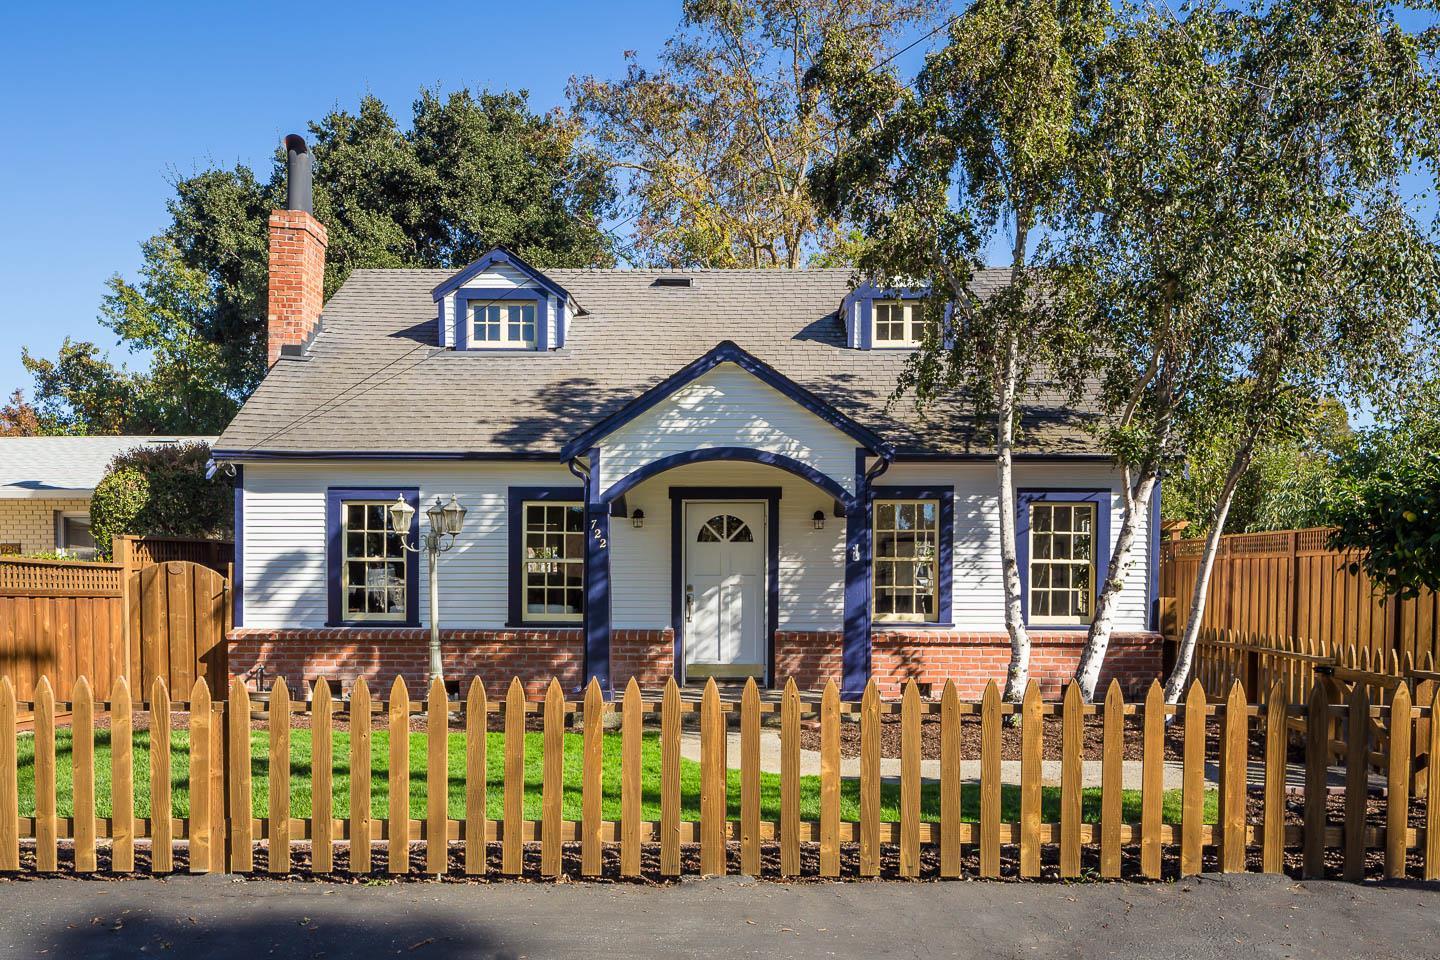 Nestled in the popular North Fair Oaks neighborhood, this quaint Cape Cod style residence is believed to be one of the original farmhouses that pre-date the area's development. With lath and plaster walls throughout, as well as many meticulously maintained original period details, the home is flooded with light and boasts generous room proportions. The living room is framed by a wood burning fireplace, stately woodwork, and built-in shelving, while the cheery country-style eat-in kitchen provides access to the backyard. The primary bedroom features a walk-in closet and proximity to the home's remodeled bathroom, while a second downstairs bedroom has flexible usage as a den or home office. Two additional bedrooms are upstairs with charming dormer windows. The backyard is spacious and sunny, while an oversized two-car detached garage offers space for a workshop. Primely positioned, the home is moments away from shopping and daily conveniences at Marsh Manor, as well as major employers.